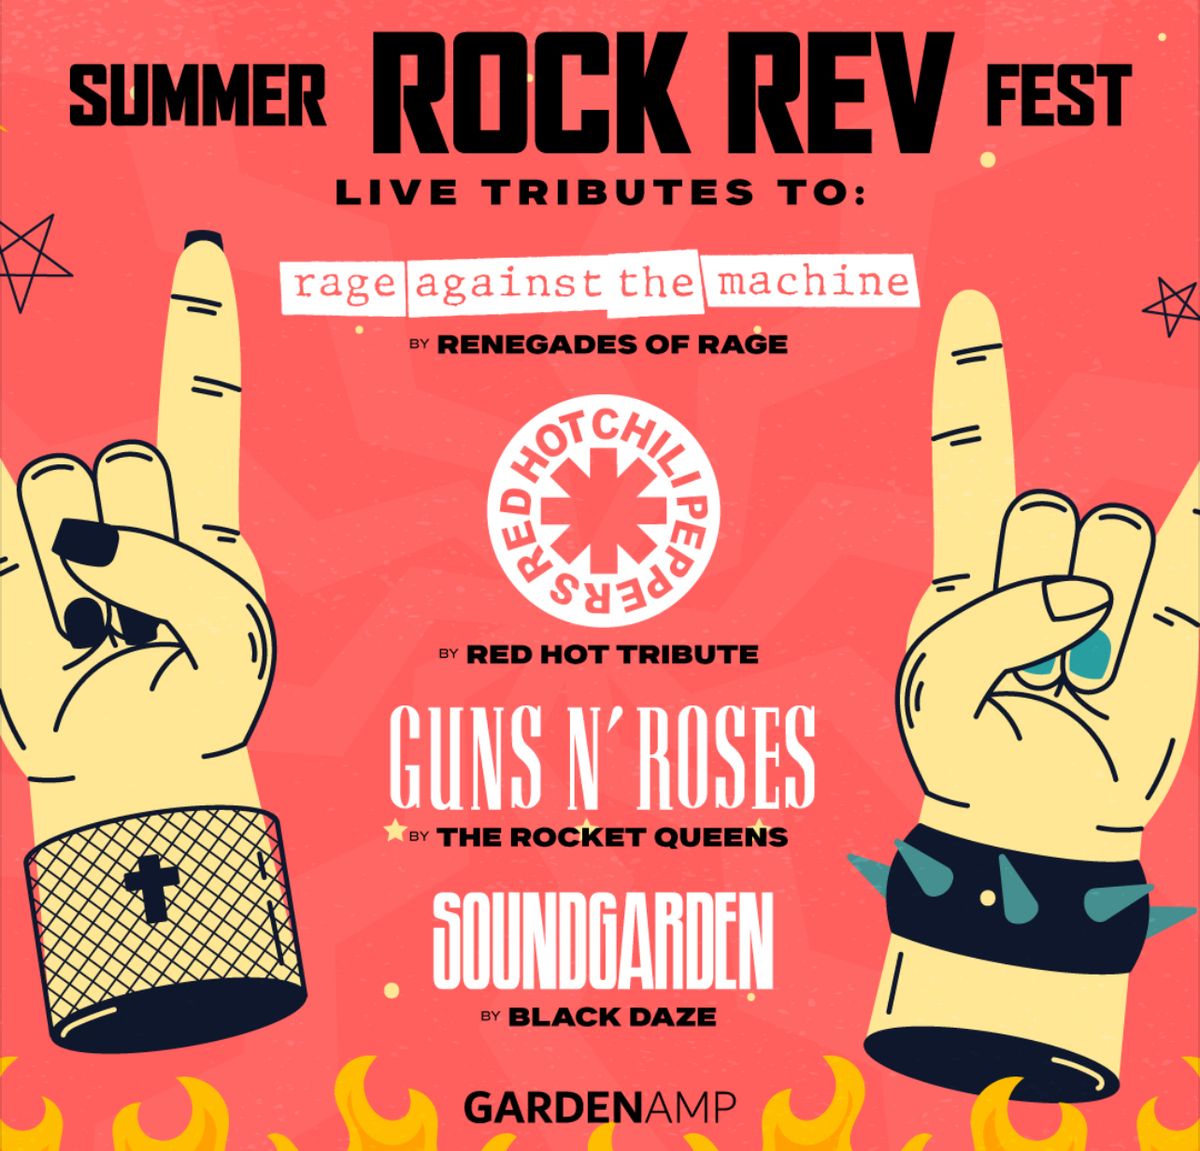 Rage Against The Machine, Red Hot Chili Peppers, Guns N Roses, Soundgarden tributes at Garden Amp